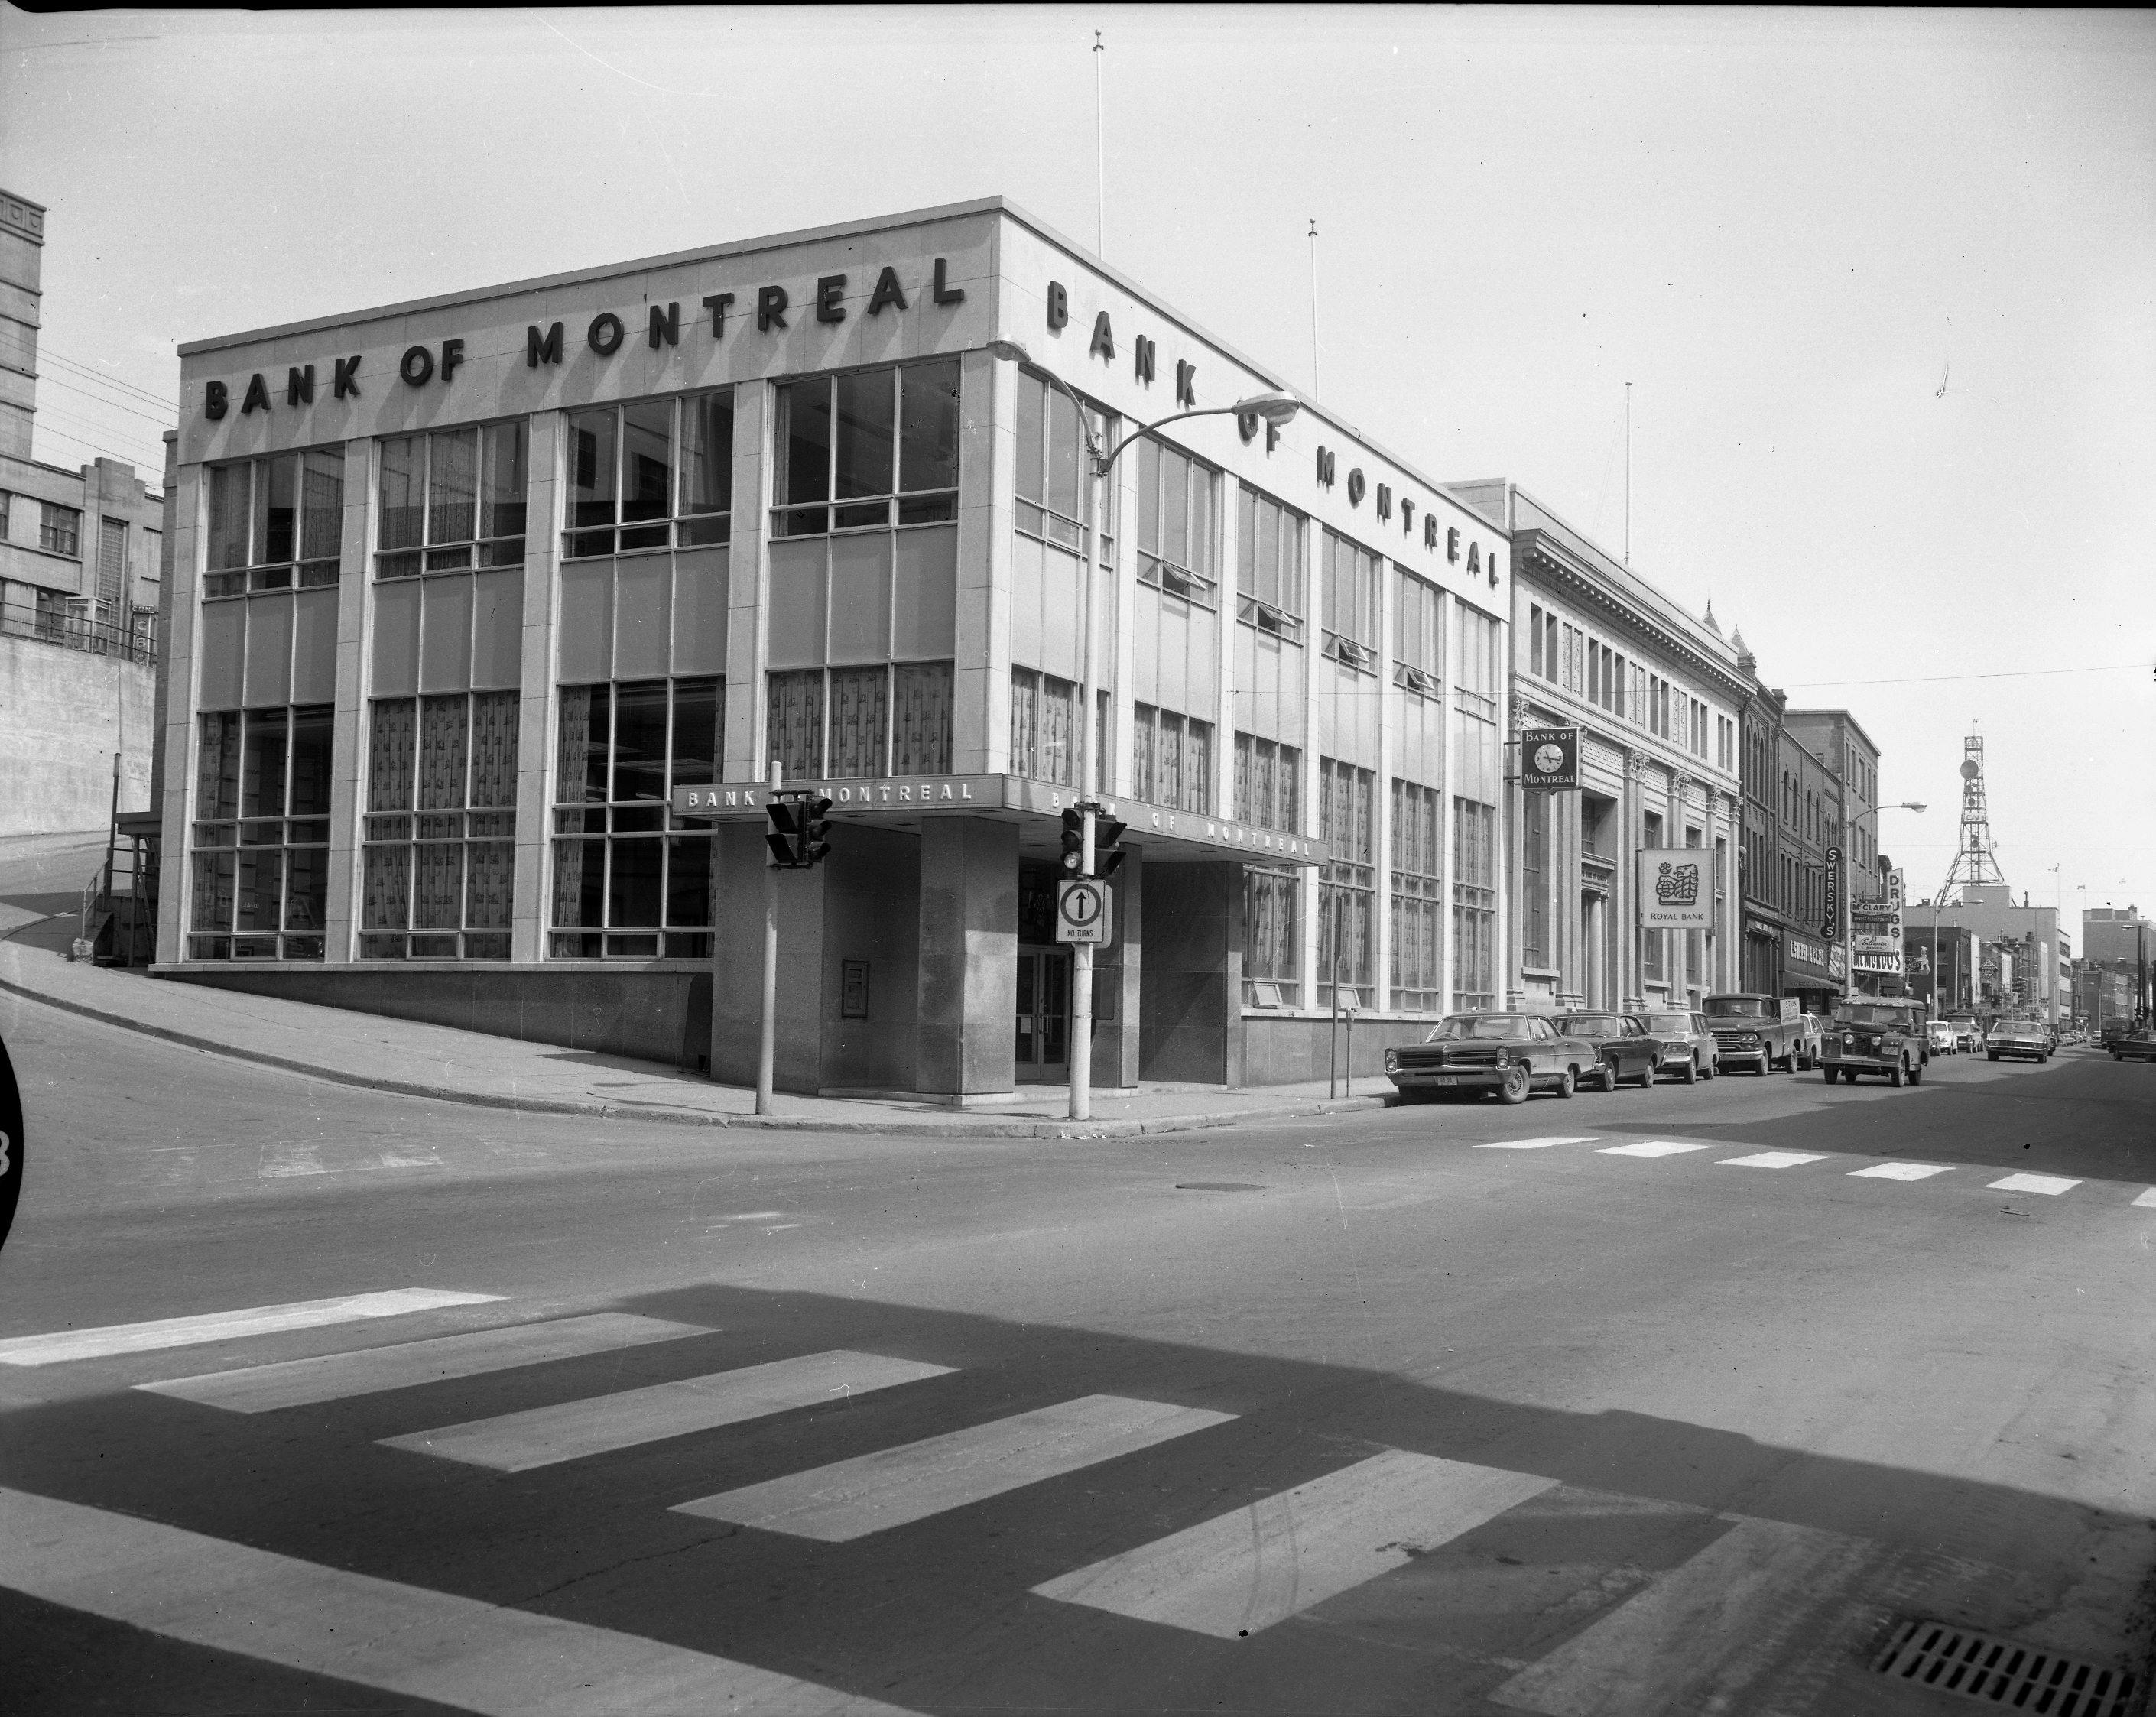 1960's: The Bank of Montreal Building at the corner of Water Street and McBride's Hill